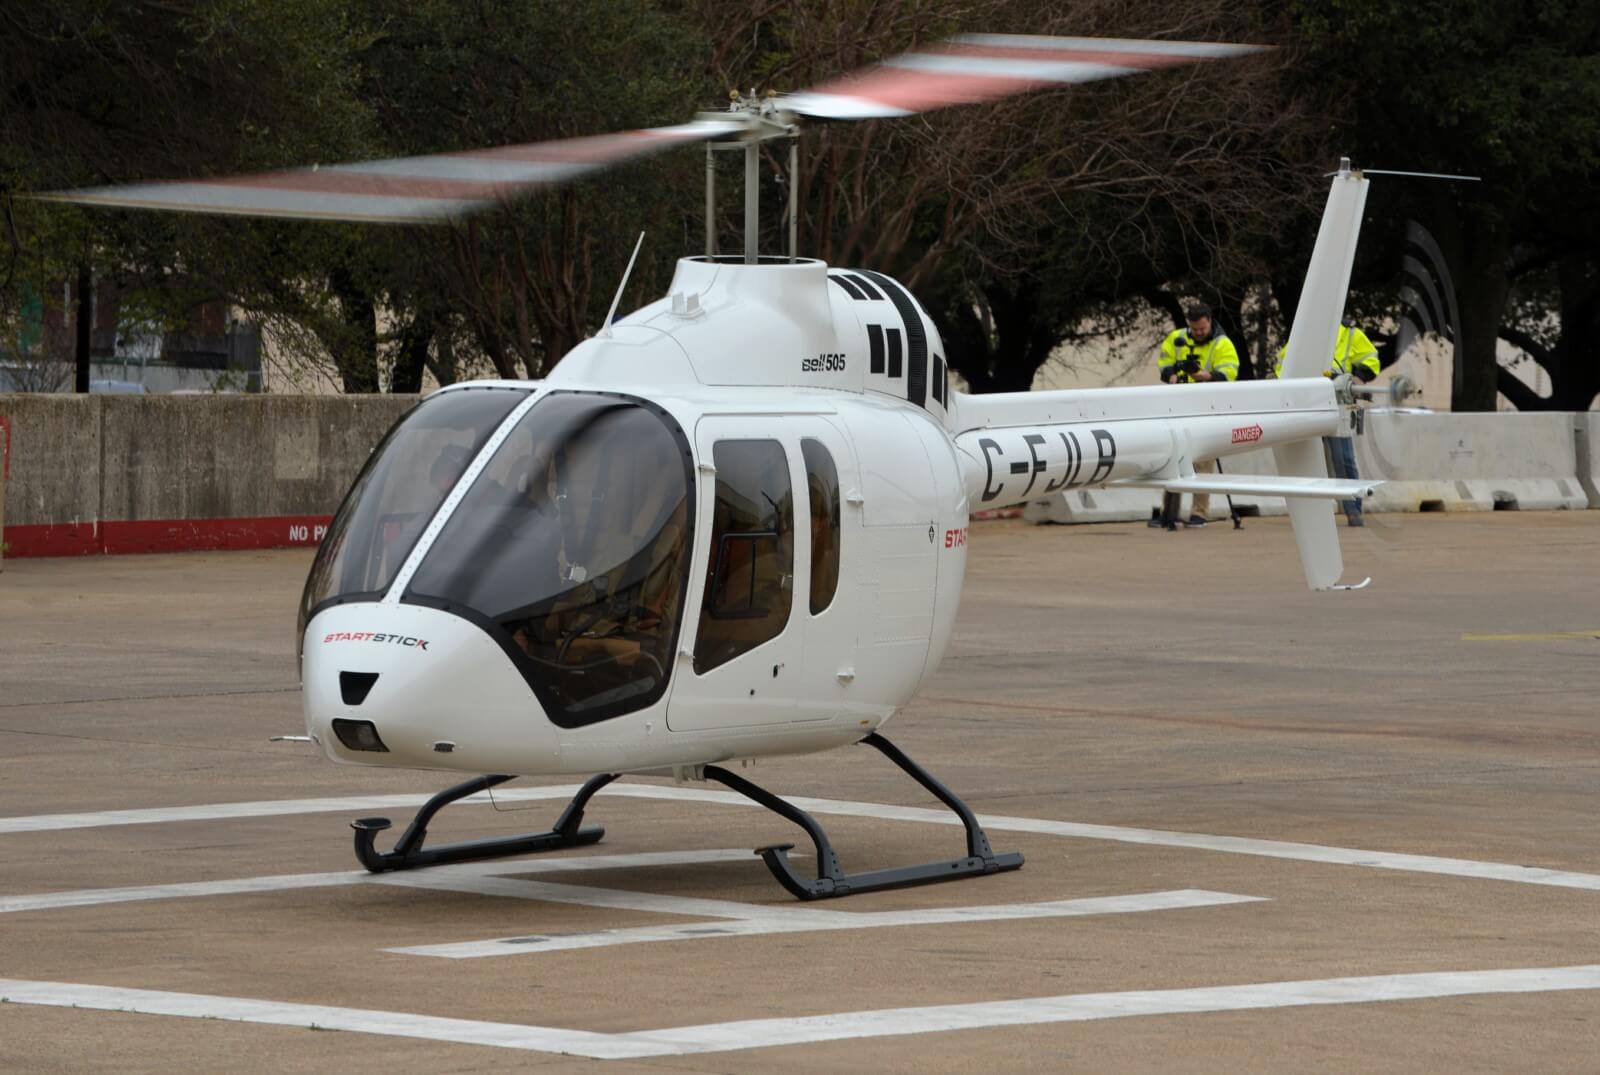 A Bell 505 Jet Ranger X arrives at HAI Heli-Expo 2017 in Dallas. Honeywell's latest helicopter purchase outlook reports strong demand for light single-engine models such as the Bell 505, particularly in North America.